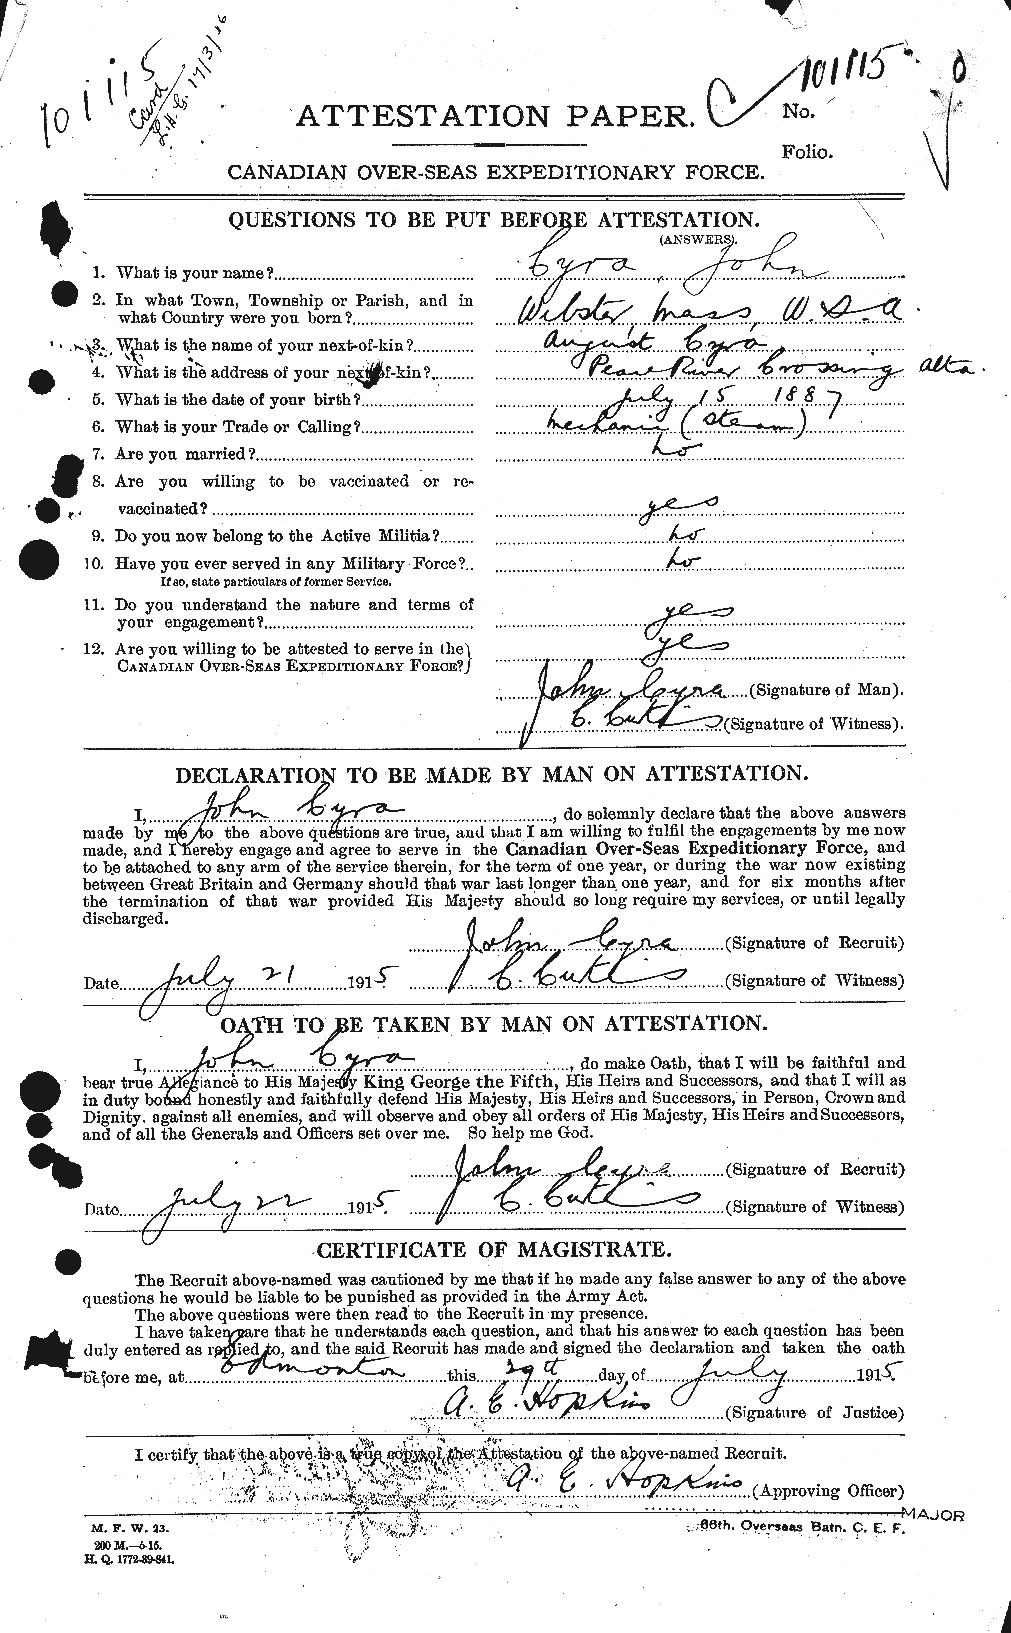 Personnel Records of the First World War - CEF 072245a